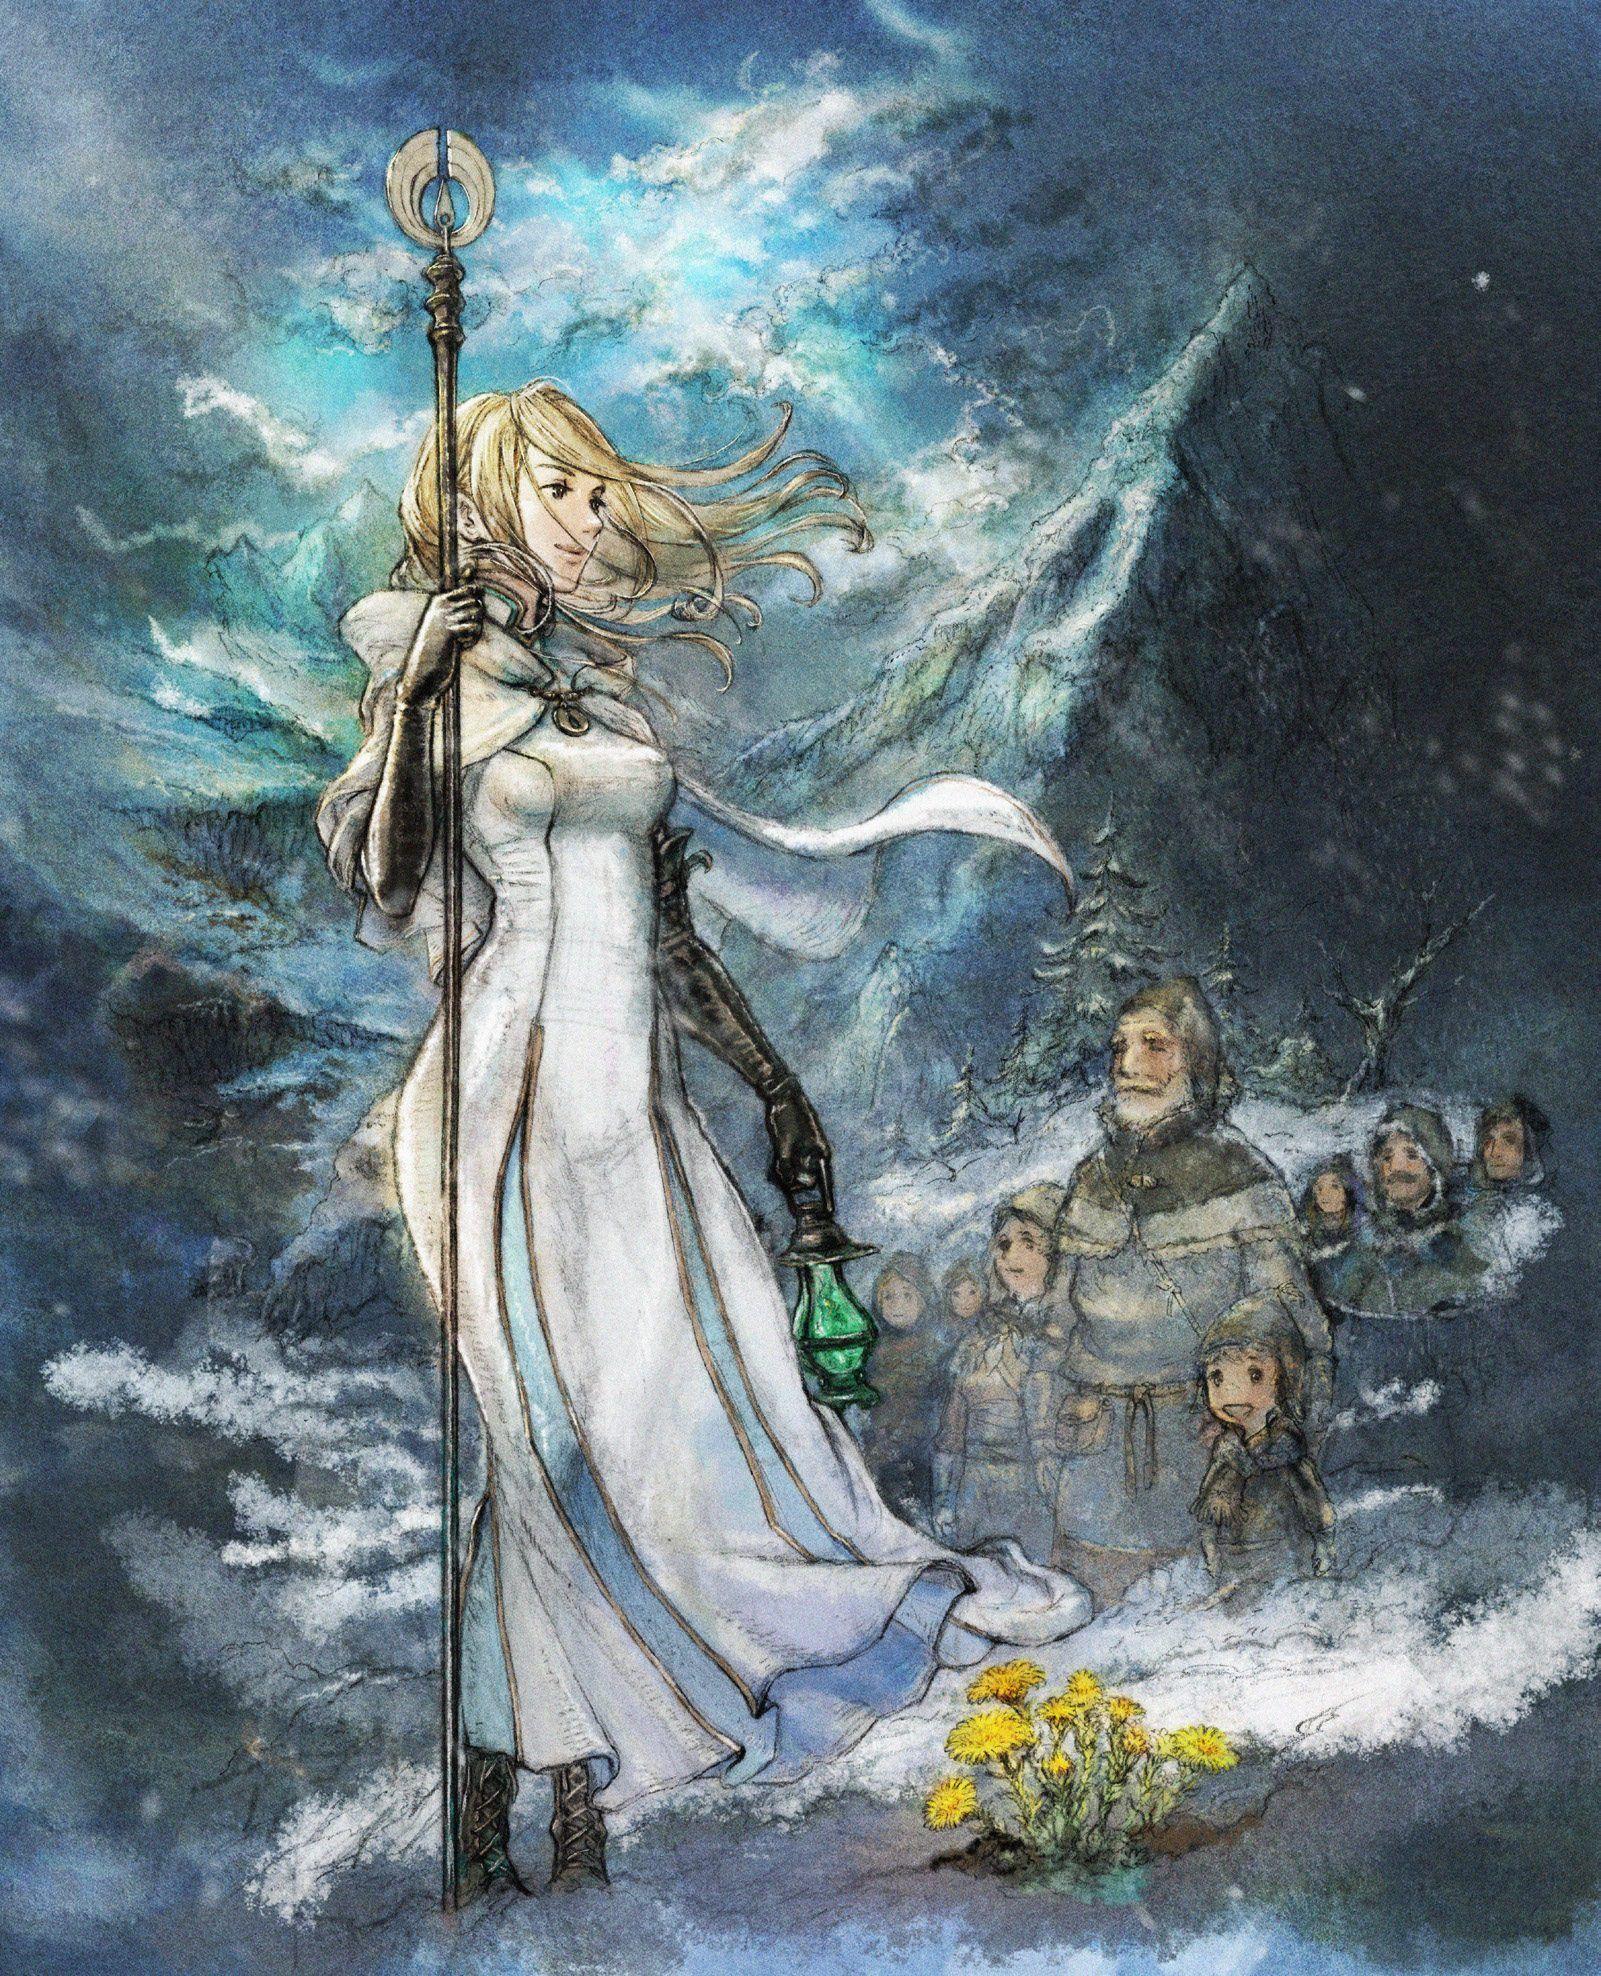 Octopath Traveler Official Character Artwork and phone wallpaper